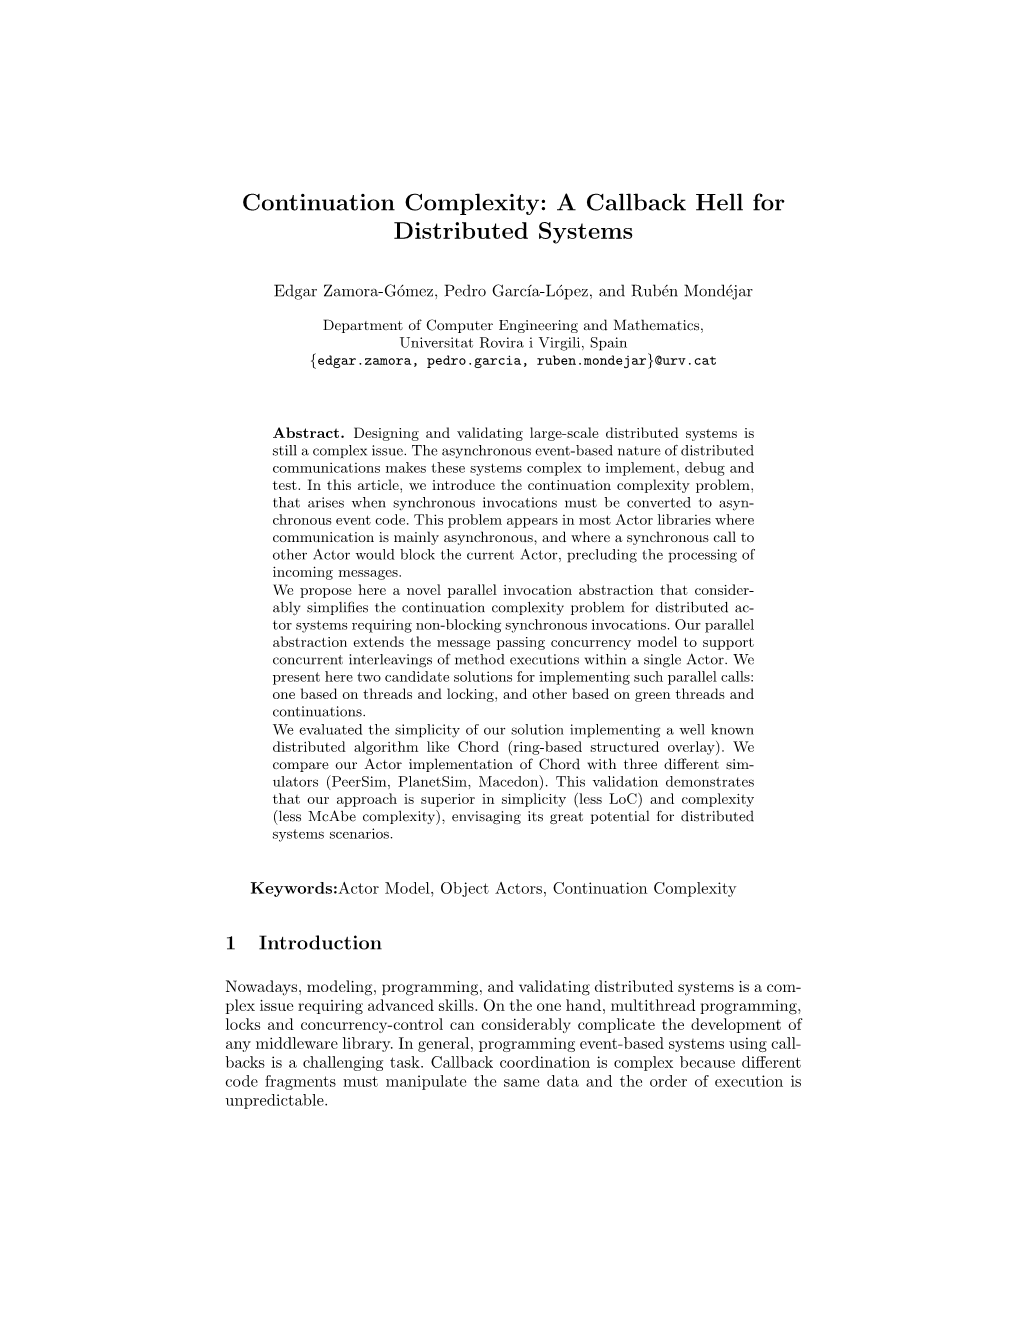 Continuation Complexity: a Callback Hell for Distributed Systems